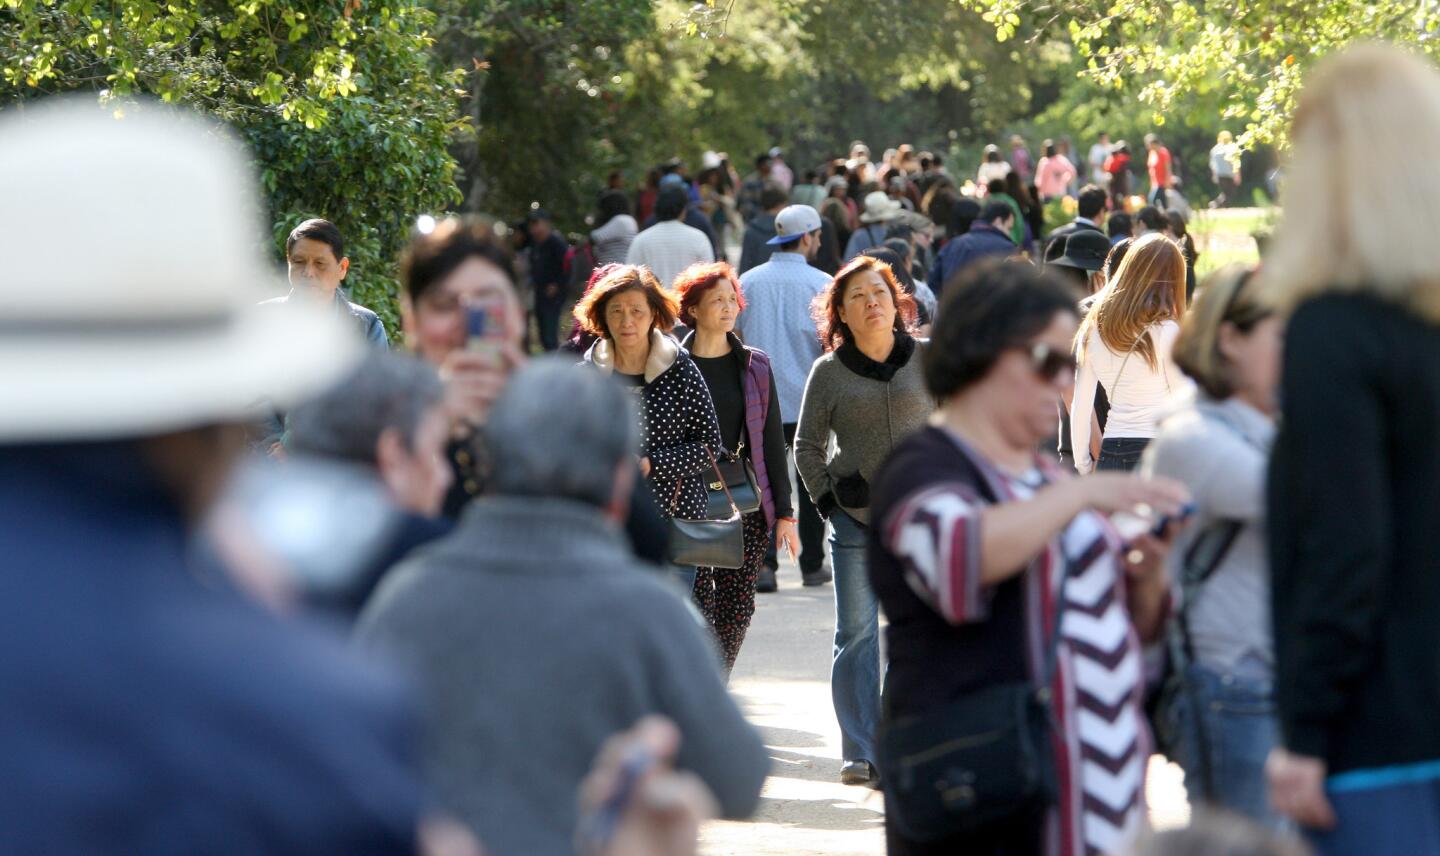 Photo Gallery: Annual Cherry Blossom Festival brings huge crowds to Descanso Gardens